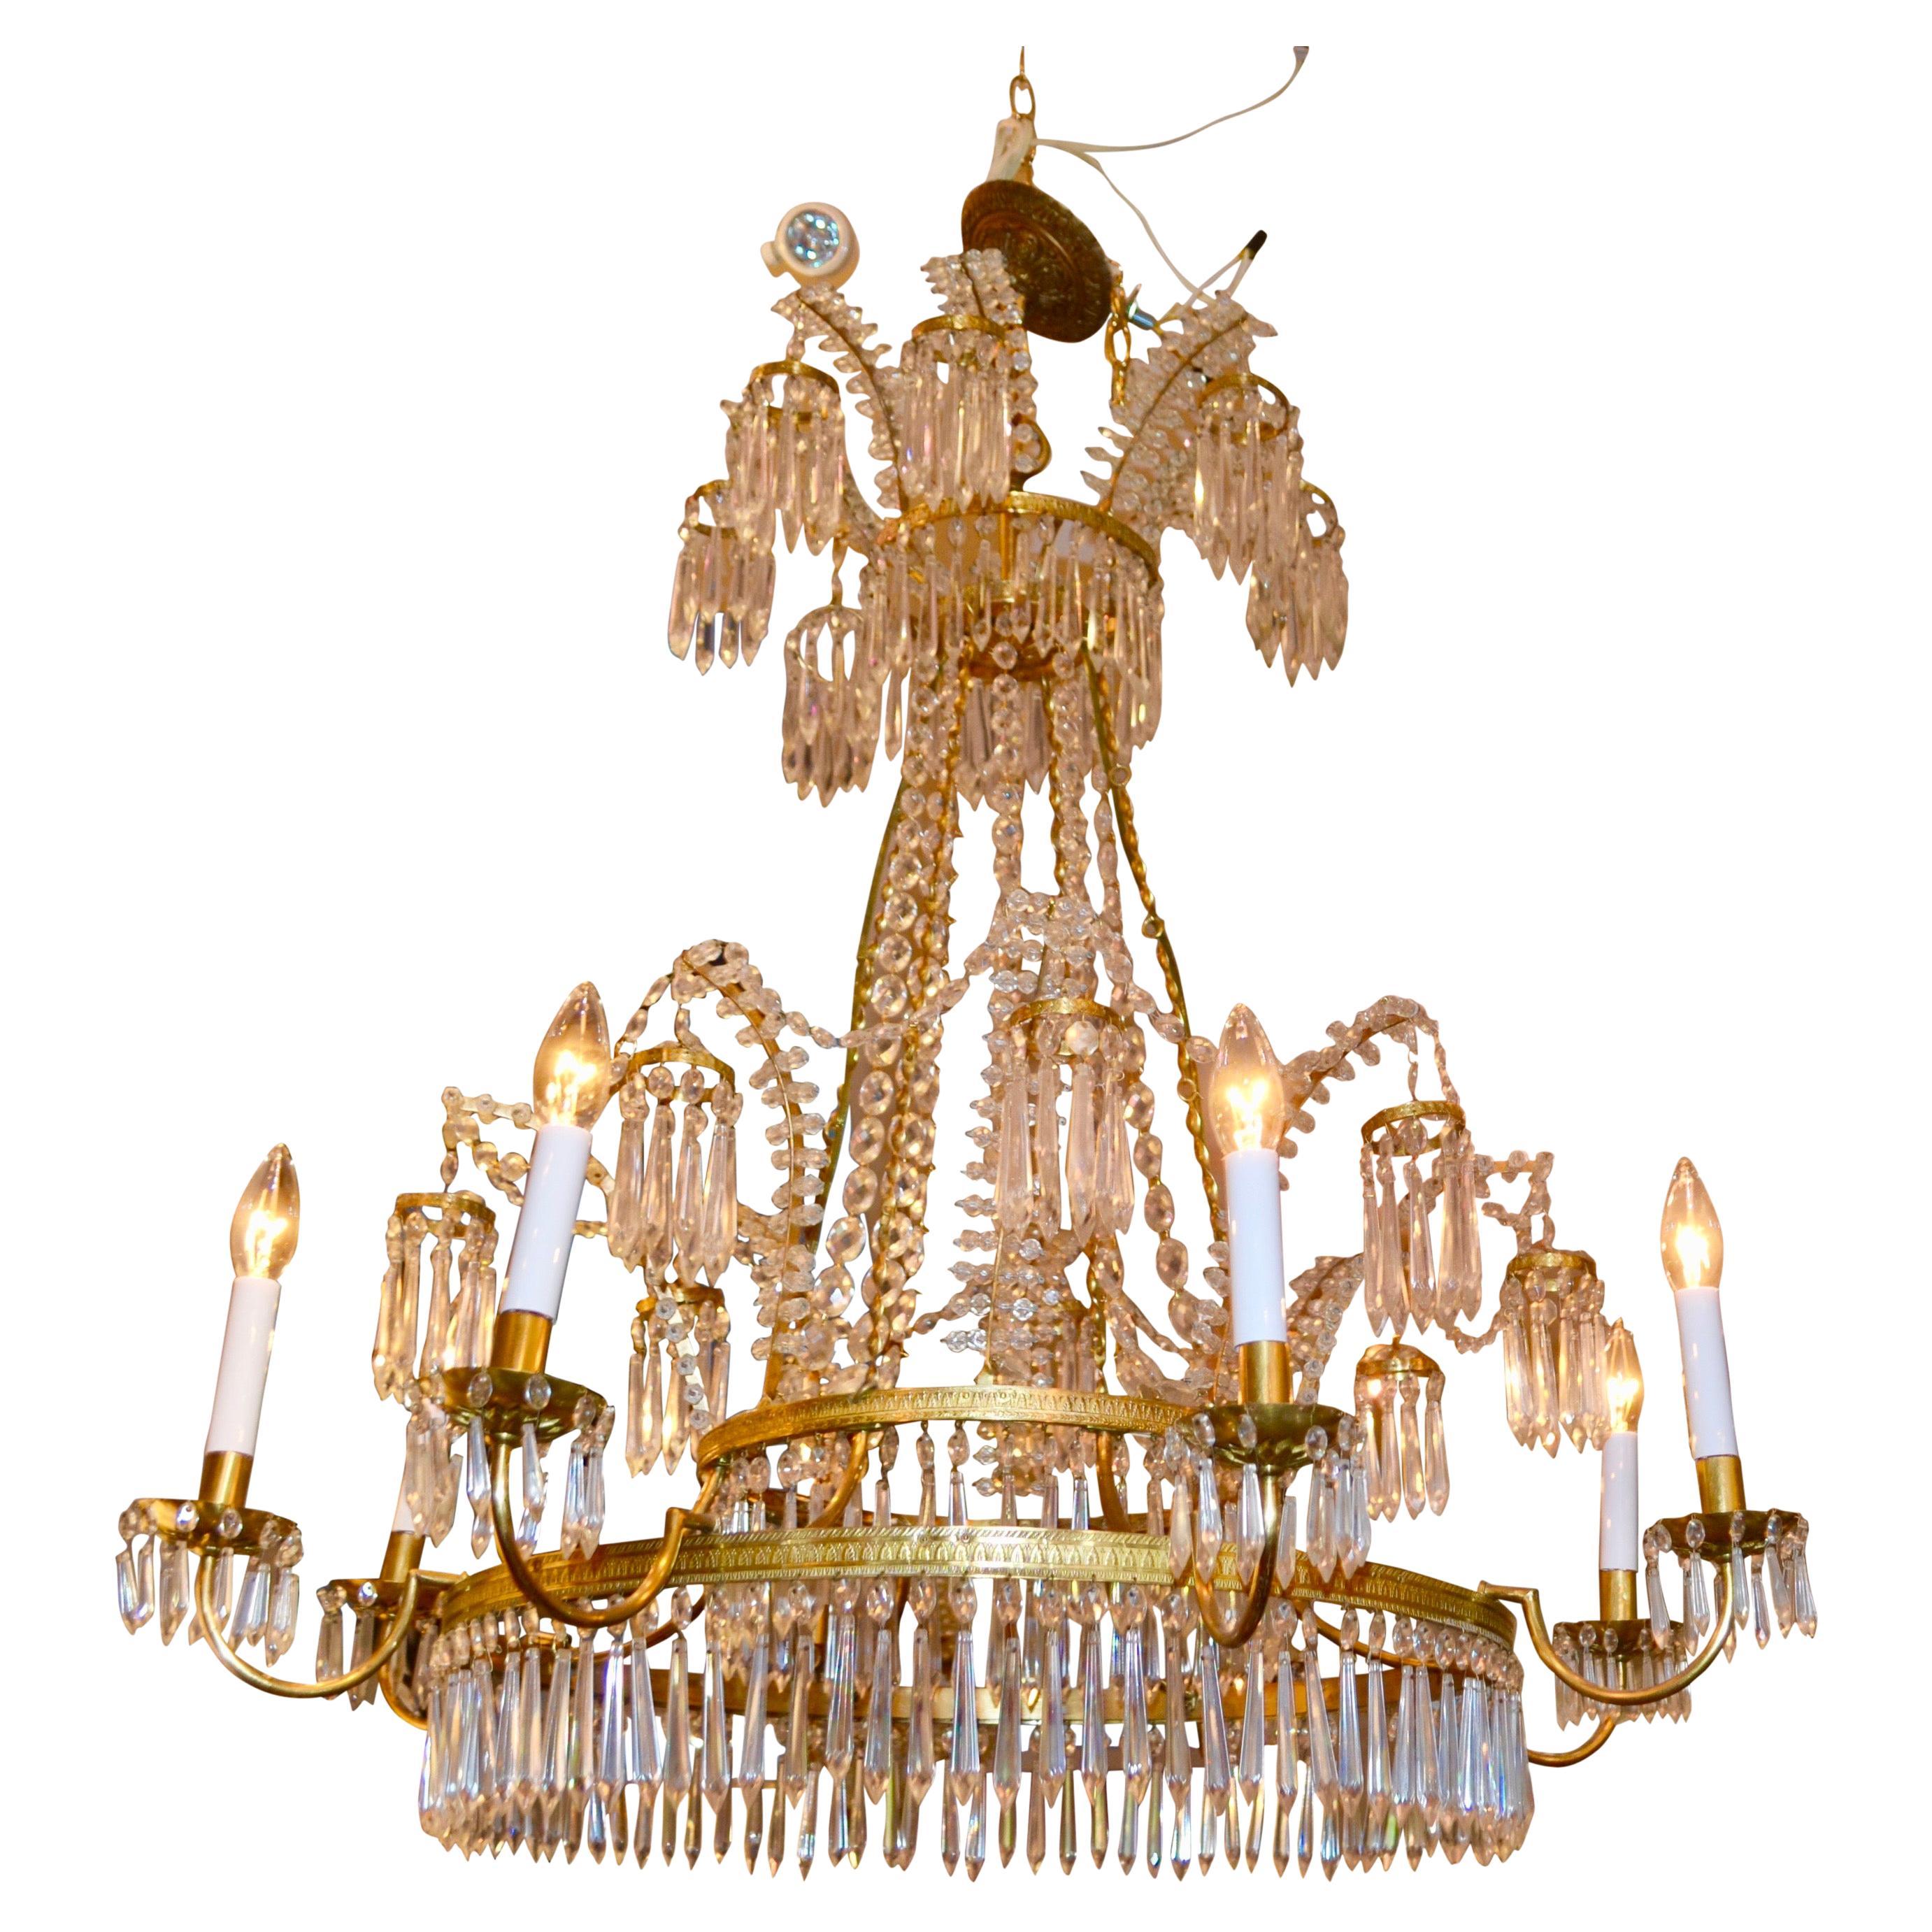 A wonderful example of a Baltic/Russian crystal and bronze chandelier the style of which is pure early 19thC. Three gilt bronze rings support lower hanging crystals as well as an upper spray of 'waterfall' design branches holding small crystal